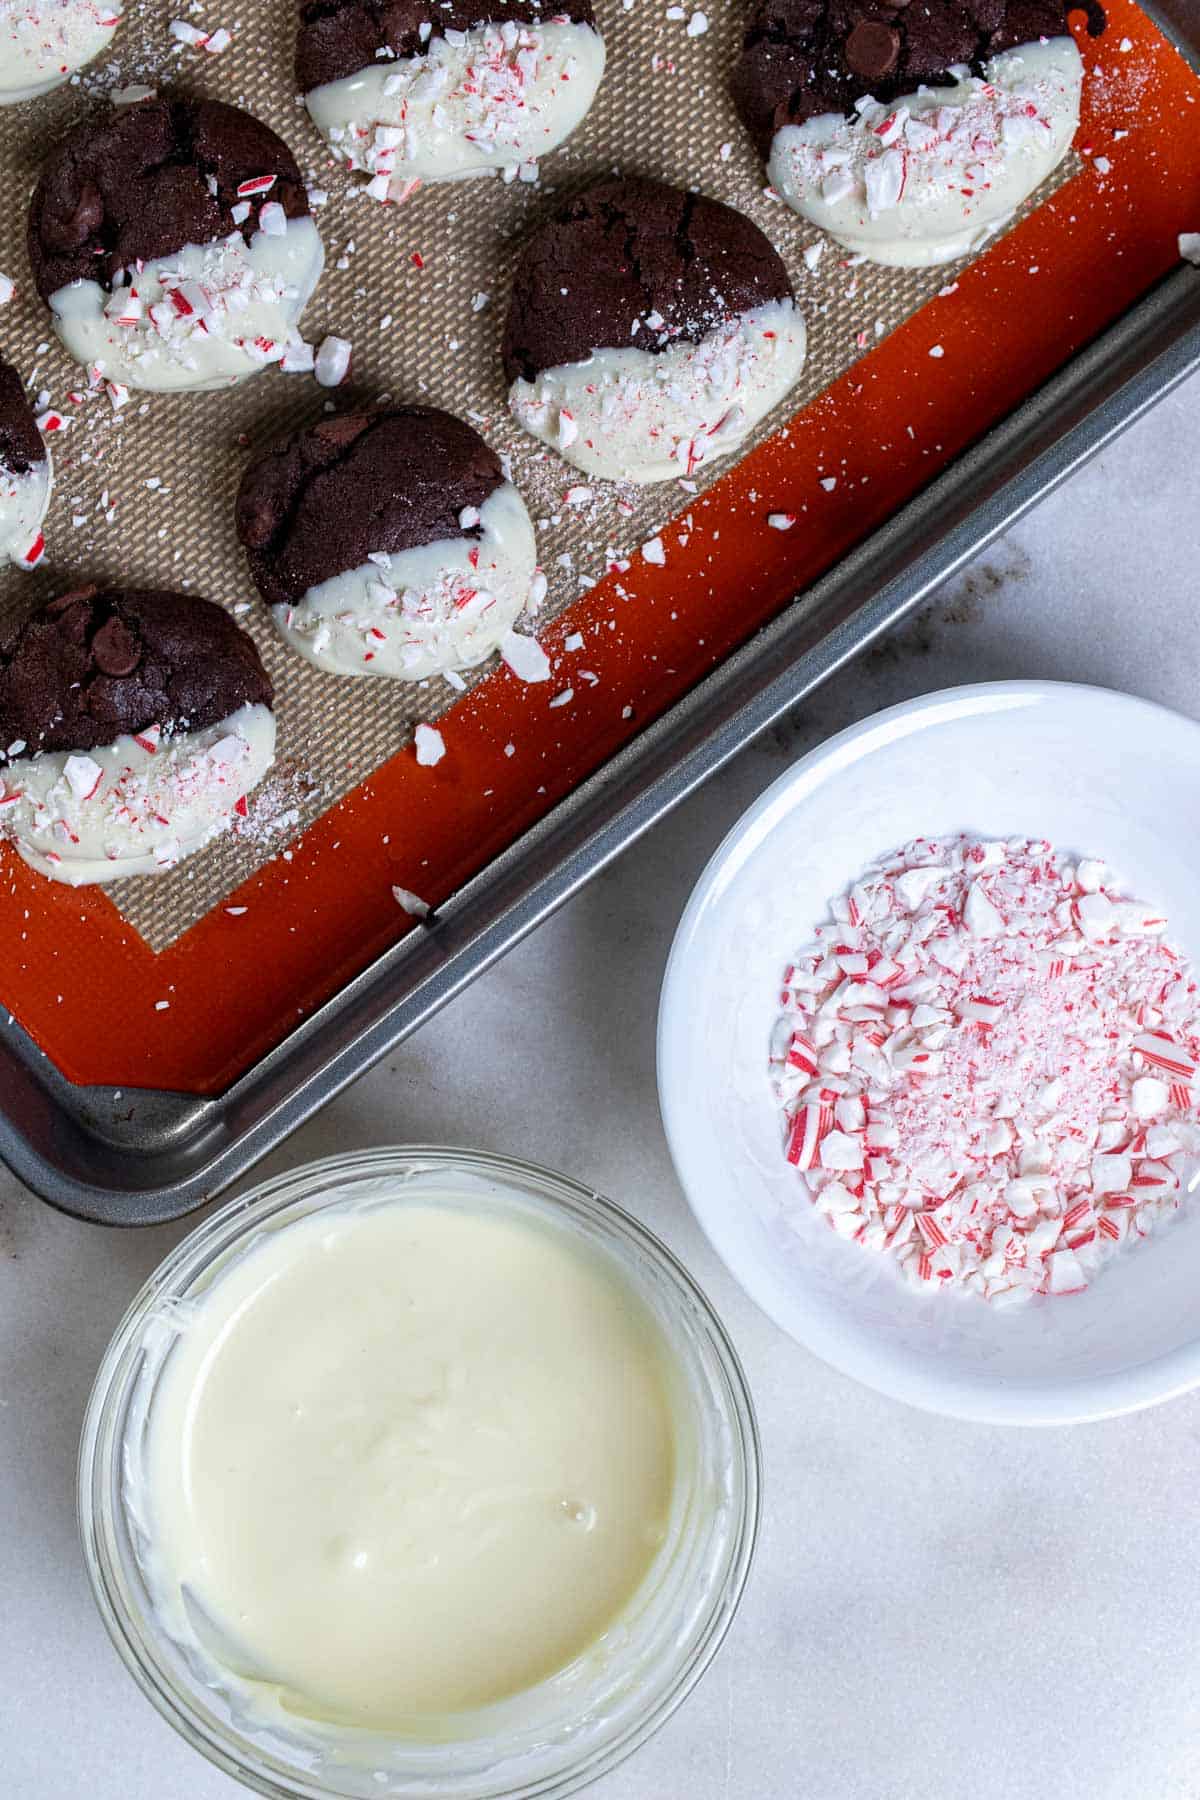 Dipping mocha cookies into melted white chocolate and sprinkling with crushed candy canes.